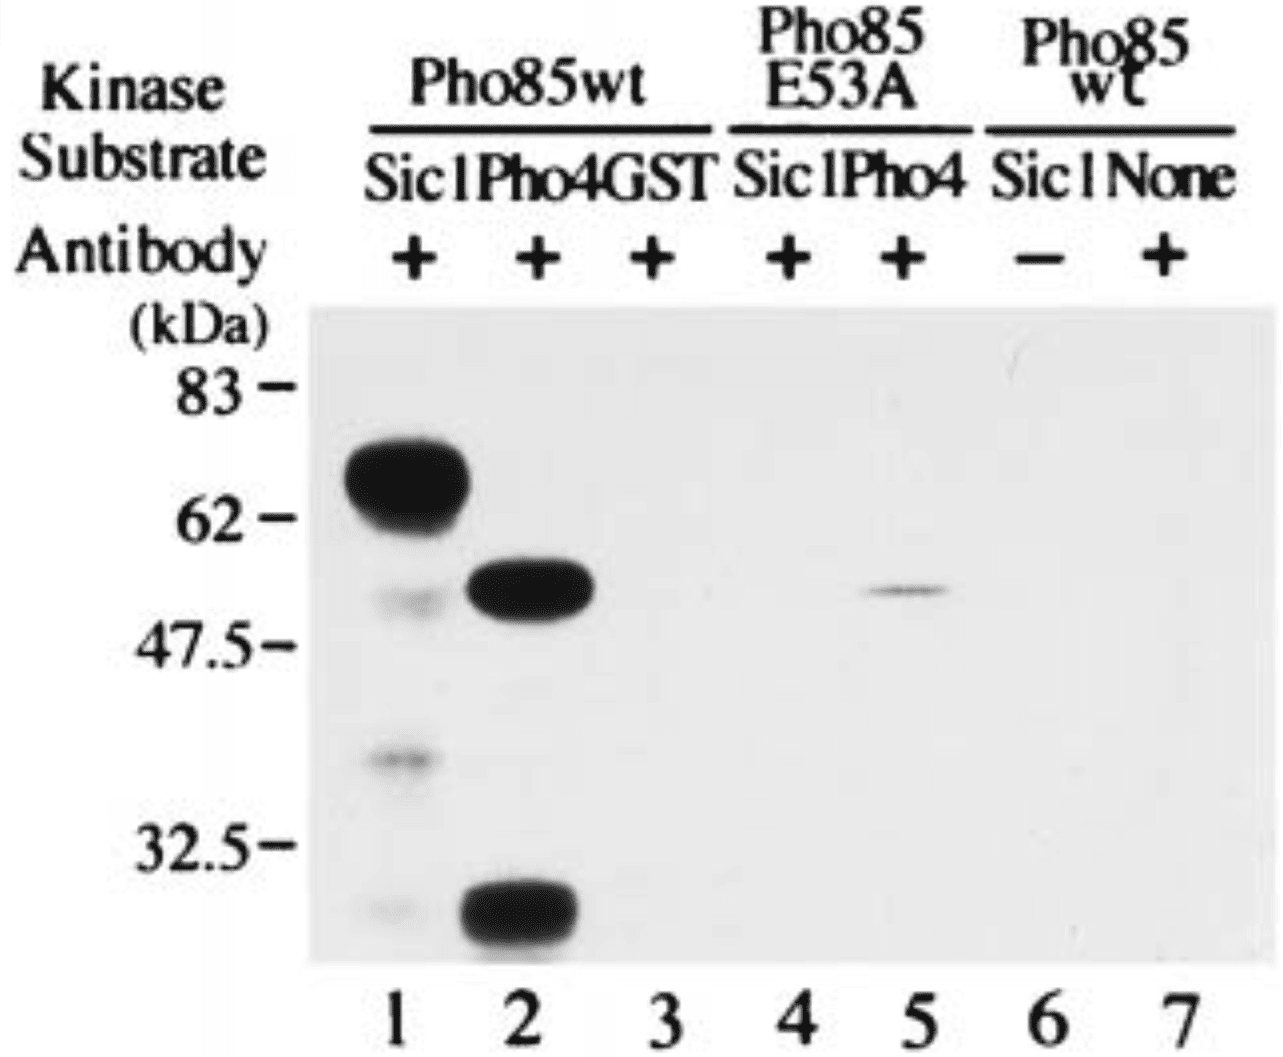 Phosphorylation Of Sic1, A Cyclin-dependent Kinase (Cdk) Inhibitor, By Cdk Including Pho85 Kinase Is Required For Its Prompt Degradation